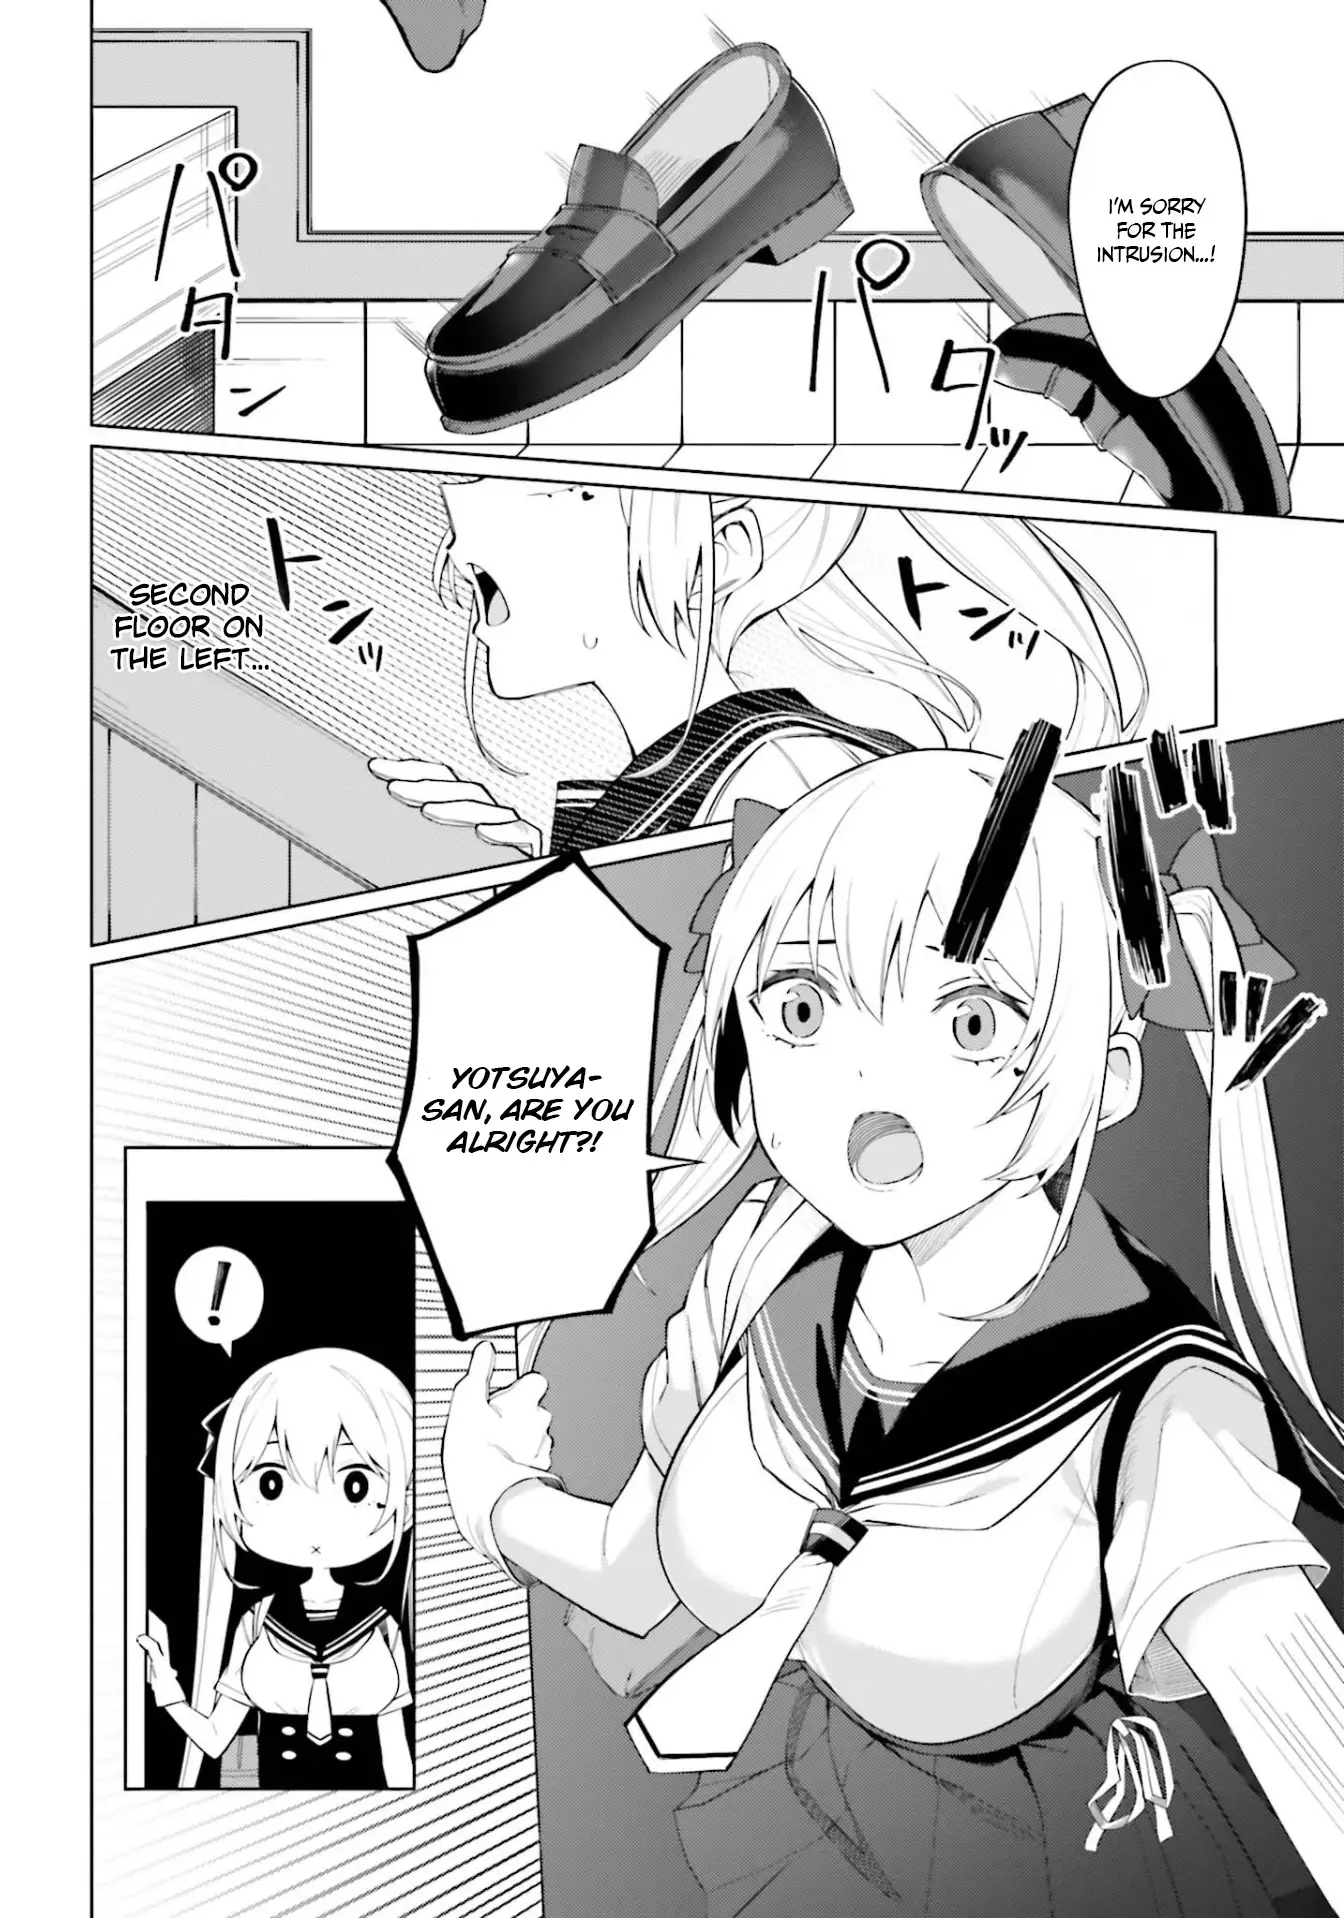 I Don't Understand Shirogane-San's Facial Expression At All - 8 page 15-85a7c370